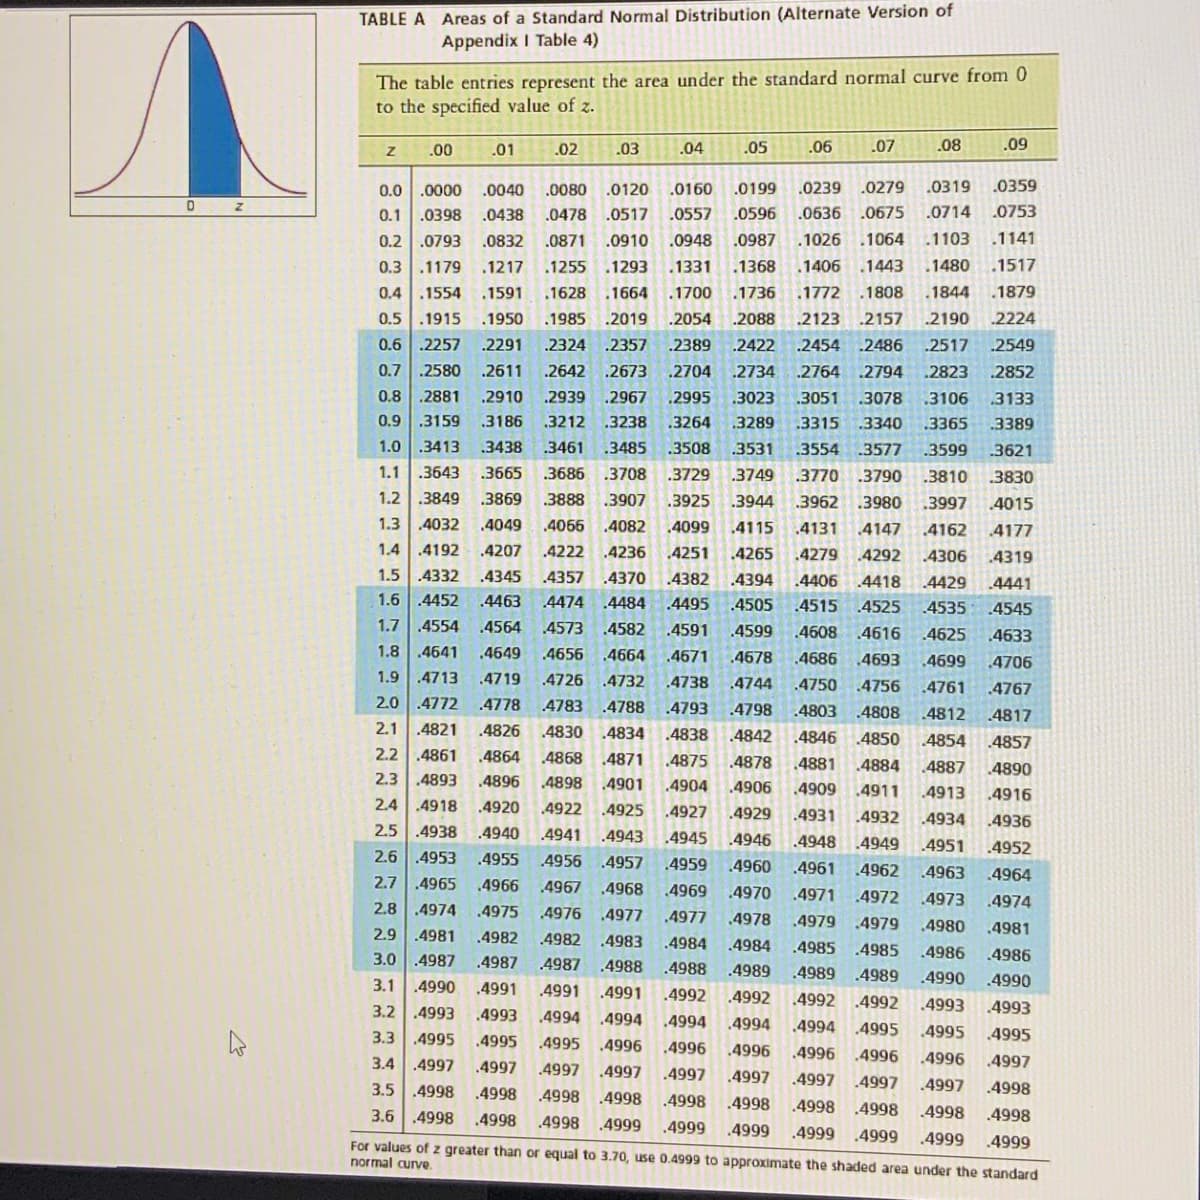 4945 44
TABLE A Areas of a Standard Normal Distribution (Alternate Version of
Appendix I Table 4)
The table entries represent the area under the standard normal curve from 0
to the specified value of z.
.00
.01
.02
.03
.04
.05
.06
.07
.08
.09
0.0 .0000
.0040
.0080
.0120
.0160
.0199
.0239
.0279
.0319
.0359
0.1
.0398
.0438
.0478
.0517
.0557
.0596
.0636
.0675
.0714
.0753
0.2
.0793
.0832
.0871
.0910
.0948
.0987
.1026
.1064
1103
.1141
0.3.1179
.1217
.1255
1293
.1331
.1368
.1406
.1443
1480
.1517
0.4.1554
.1591
.1628
.1664
.1700
.1736
.1772 .1808
1844
1879
0.5 .1915
.1950
.1985
.2019
.2054
.2088
.2123
.2157
2190
2224
0.6 .2257
.2291
.2324
.2357
.2389
.2422
.2454 .2486
2517
2549
0.7
.2580
.2611
.2642
.2673
.2704
.2734
.2764 .2794
.2823
2852
0.8
.2881
.2910
.2939
.2967
.2995
.3023
.3051
.3078
3106
3133
0.9
.3159
.3186
3212
.3238
.3264
.3289
.3315
.3340
.3365
3389
1.0 .3413
1.1 .3643
.3438
.3461
.3485
.3508
.3531
.3554
3577
.3599
3621
.3665
.3686
.3708
.3729
3749
.3770
.3790
3810
3830
1.2 .3849
.3869
.3888
.3907
.3925
3944
.3962
.3980
.3997
4015
1.3 .4032
.4049
,4066
.4082
.4099
.4115
4131
4147
.4162
4177
1.4.4192
.4207
.4222
.4236
.4251
.4265
.4279
.4292
.4306
.4319
1.5 .4332
.4345
.4357 .4370
.4382
.4394
.4406
.4418
.4429
.4441
1.6 .4452
.4463
4474
.4484
.4495
.4505
4515
4525
.4535
4545
1.7
.4554
.4564
.4573
.4582
4591
.4599
.4608
.4616
.4625
4633
1.8 .4641
.4649
.4656
.4664
.4671
.4678
.4686
.4693
.4699
4706
1.9
.4713
.4719
.4726
.4732
.4738
.4744
.4750
.4756
.4761
.4767
2.0 .4772
2.1 .4821
.4778
.4783
.4788
.4793
.4798
.4803
4808
4812
4817
.4826
4830
4834
4838
.4842
.4846
.4850
4854
4857
2.2
.4861
.4864
.4868
.4871
.4875
.4878
.4881
4884
4887
.4890
2.3 .4893
.4896
.4898
.4901
.4904
.4906
.4909
4911
.4913
.4916
2.4
.4918
.4920
.4922
.4925
.4927
.4929
.4931
.4932
.4934
.4936
2.5 .4938
.4940
.4941
.4943
.4948
.4949
.4951
.4952
2.6 4953
.4955
4956
.4957
.4959
4960
.4961
.4962
4963
.4964
2.7 .4965
.4966
.4967 4968
.4969
.4970
.4971
4972
.4973
.4974
2.8.4974
.4975
4976
.4977
.4977
.4978
.4979
4979
.4980
.4981
2.9 .4981
.4982
.4982
.4983
.4984
.4984
.4985
.4985
.4986
.4986
3.0 .4987
.4987
.4987
.4988
.4988
.4989
.4989
.4989
.4990
.4990
3.1
.4990
.4991
.4991
.4991
.4992
.4992
4992
.4992
.4993
4993
3.2
.4993
.4993
.4994
.4994
.4994
3.3 4995
4994
.4994
.4995
.4995
,4995
.4995
.4996
4995
.4996
.4996
.4996
.4996
3.4 .4997
.4997
.4996
.4997
.4997
.4997
.4997
.4997
.4997
4997
.4997
.4998
3.5 .4998
3.6.4998
.4998
.4998
.4998
.4998
.4998
.4998
.4998
.4998
.4998
.4998
.4998
.4999
.4999
For values of z greater than or equal to 3.70, use 0.4999 to approximate the shaded area under the standard
.4999
.4999
.4999
.4999 4999
normal curve.
